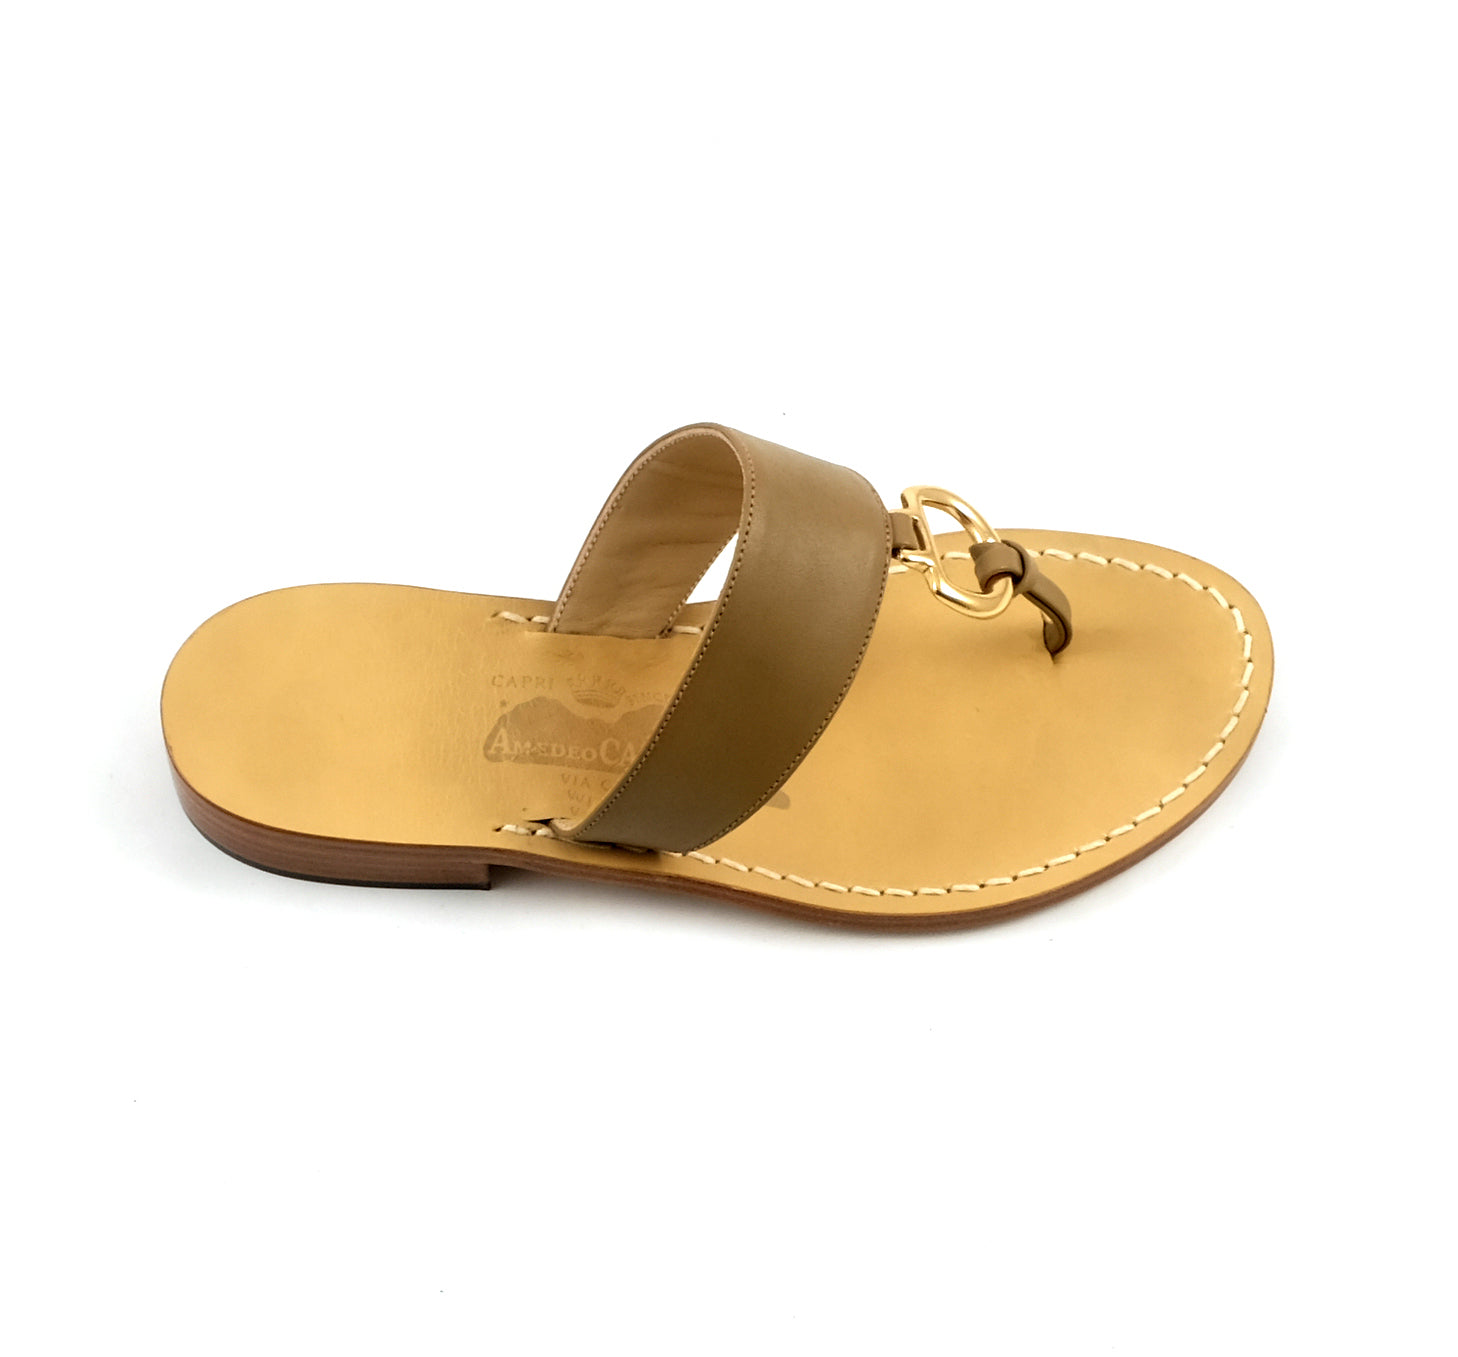 Stier Kantine volleybal Gisele - Capri Handcrafted Sandals from Italy – Canfora.com